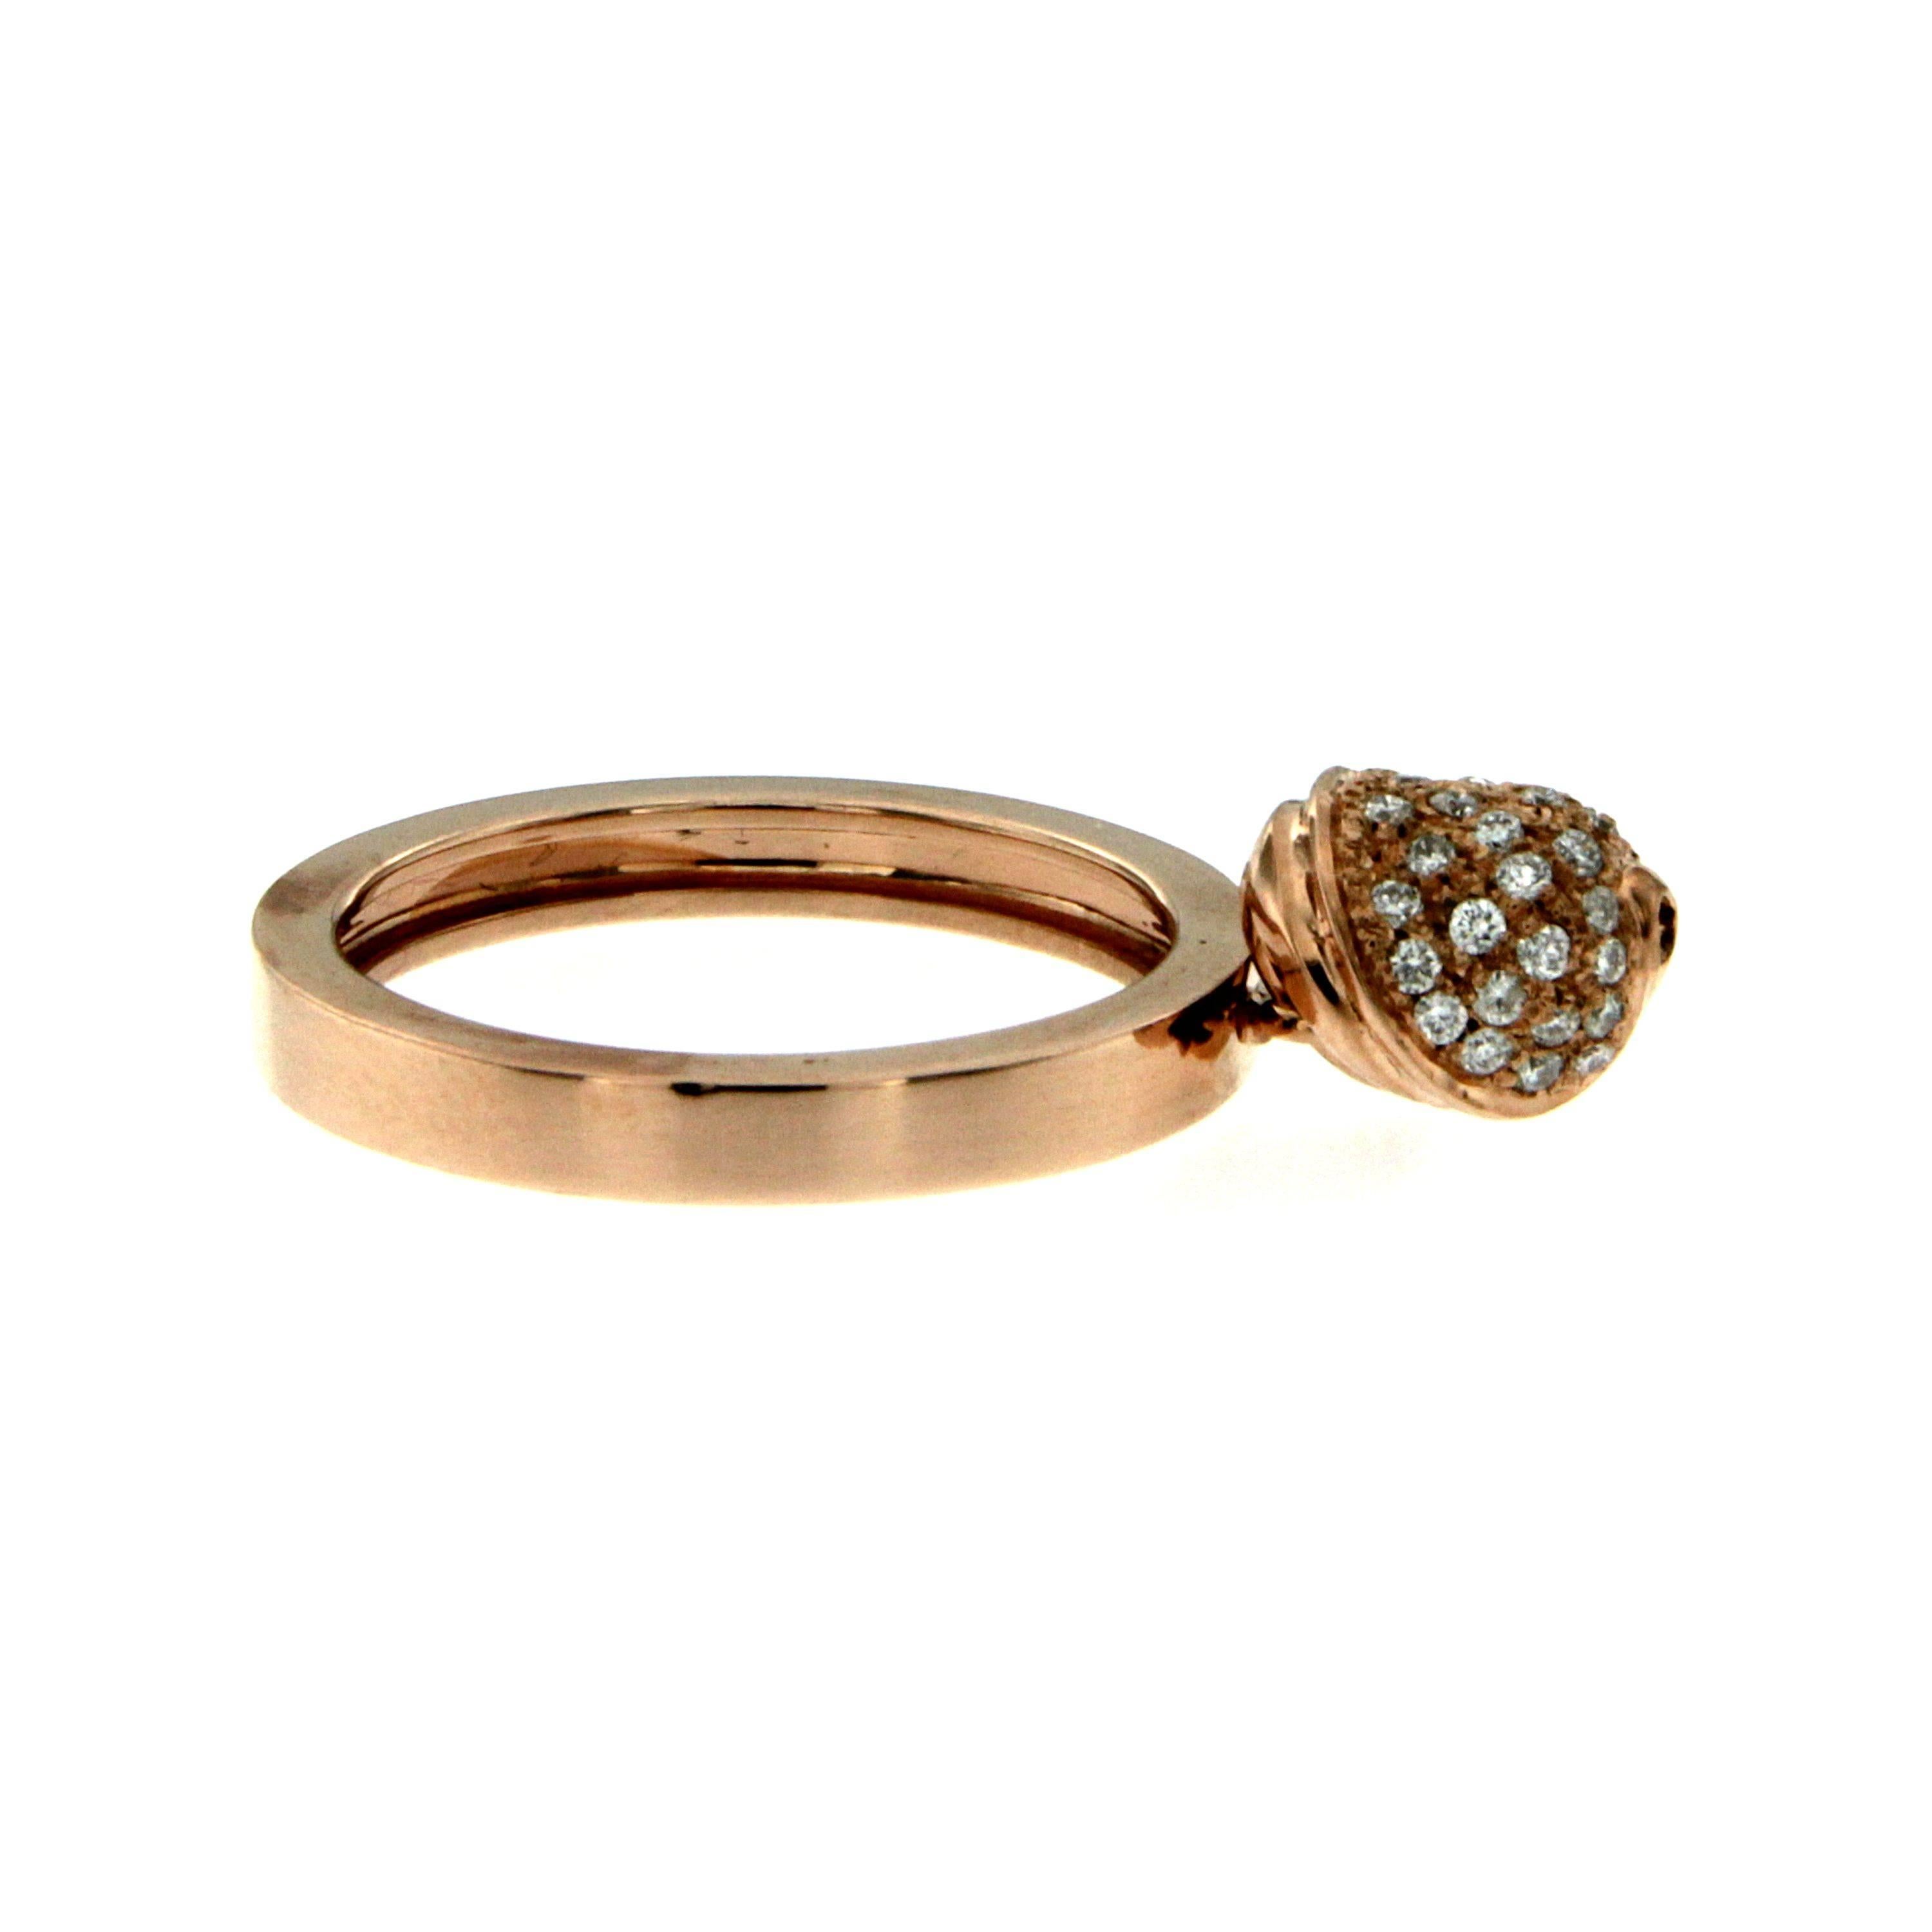 18k Rose Gold domed band supports a movable  head set with 0.30 ct of sparkling diamonds, that swings around as the wearer's hand moves. 
On the other side the ring features a single burnished diamond of 0.08 ct.
Adorable.

Gross weight: 7